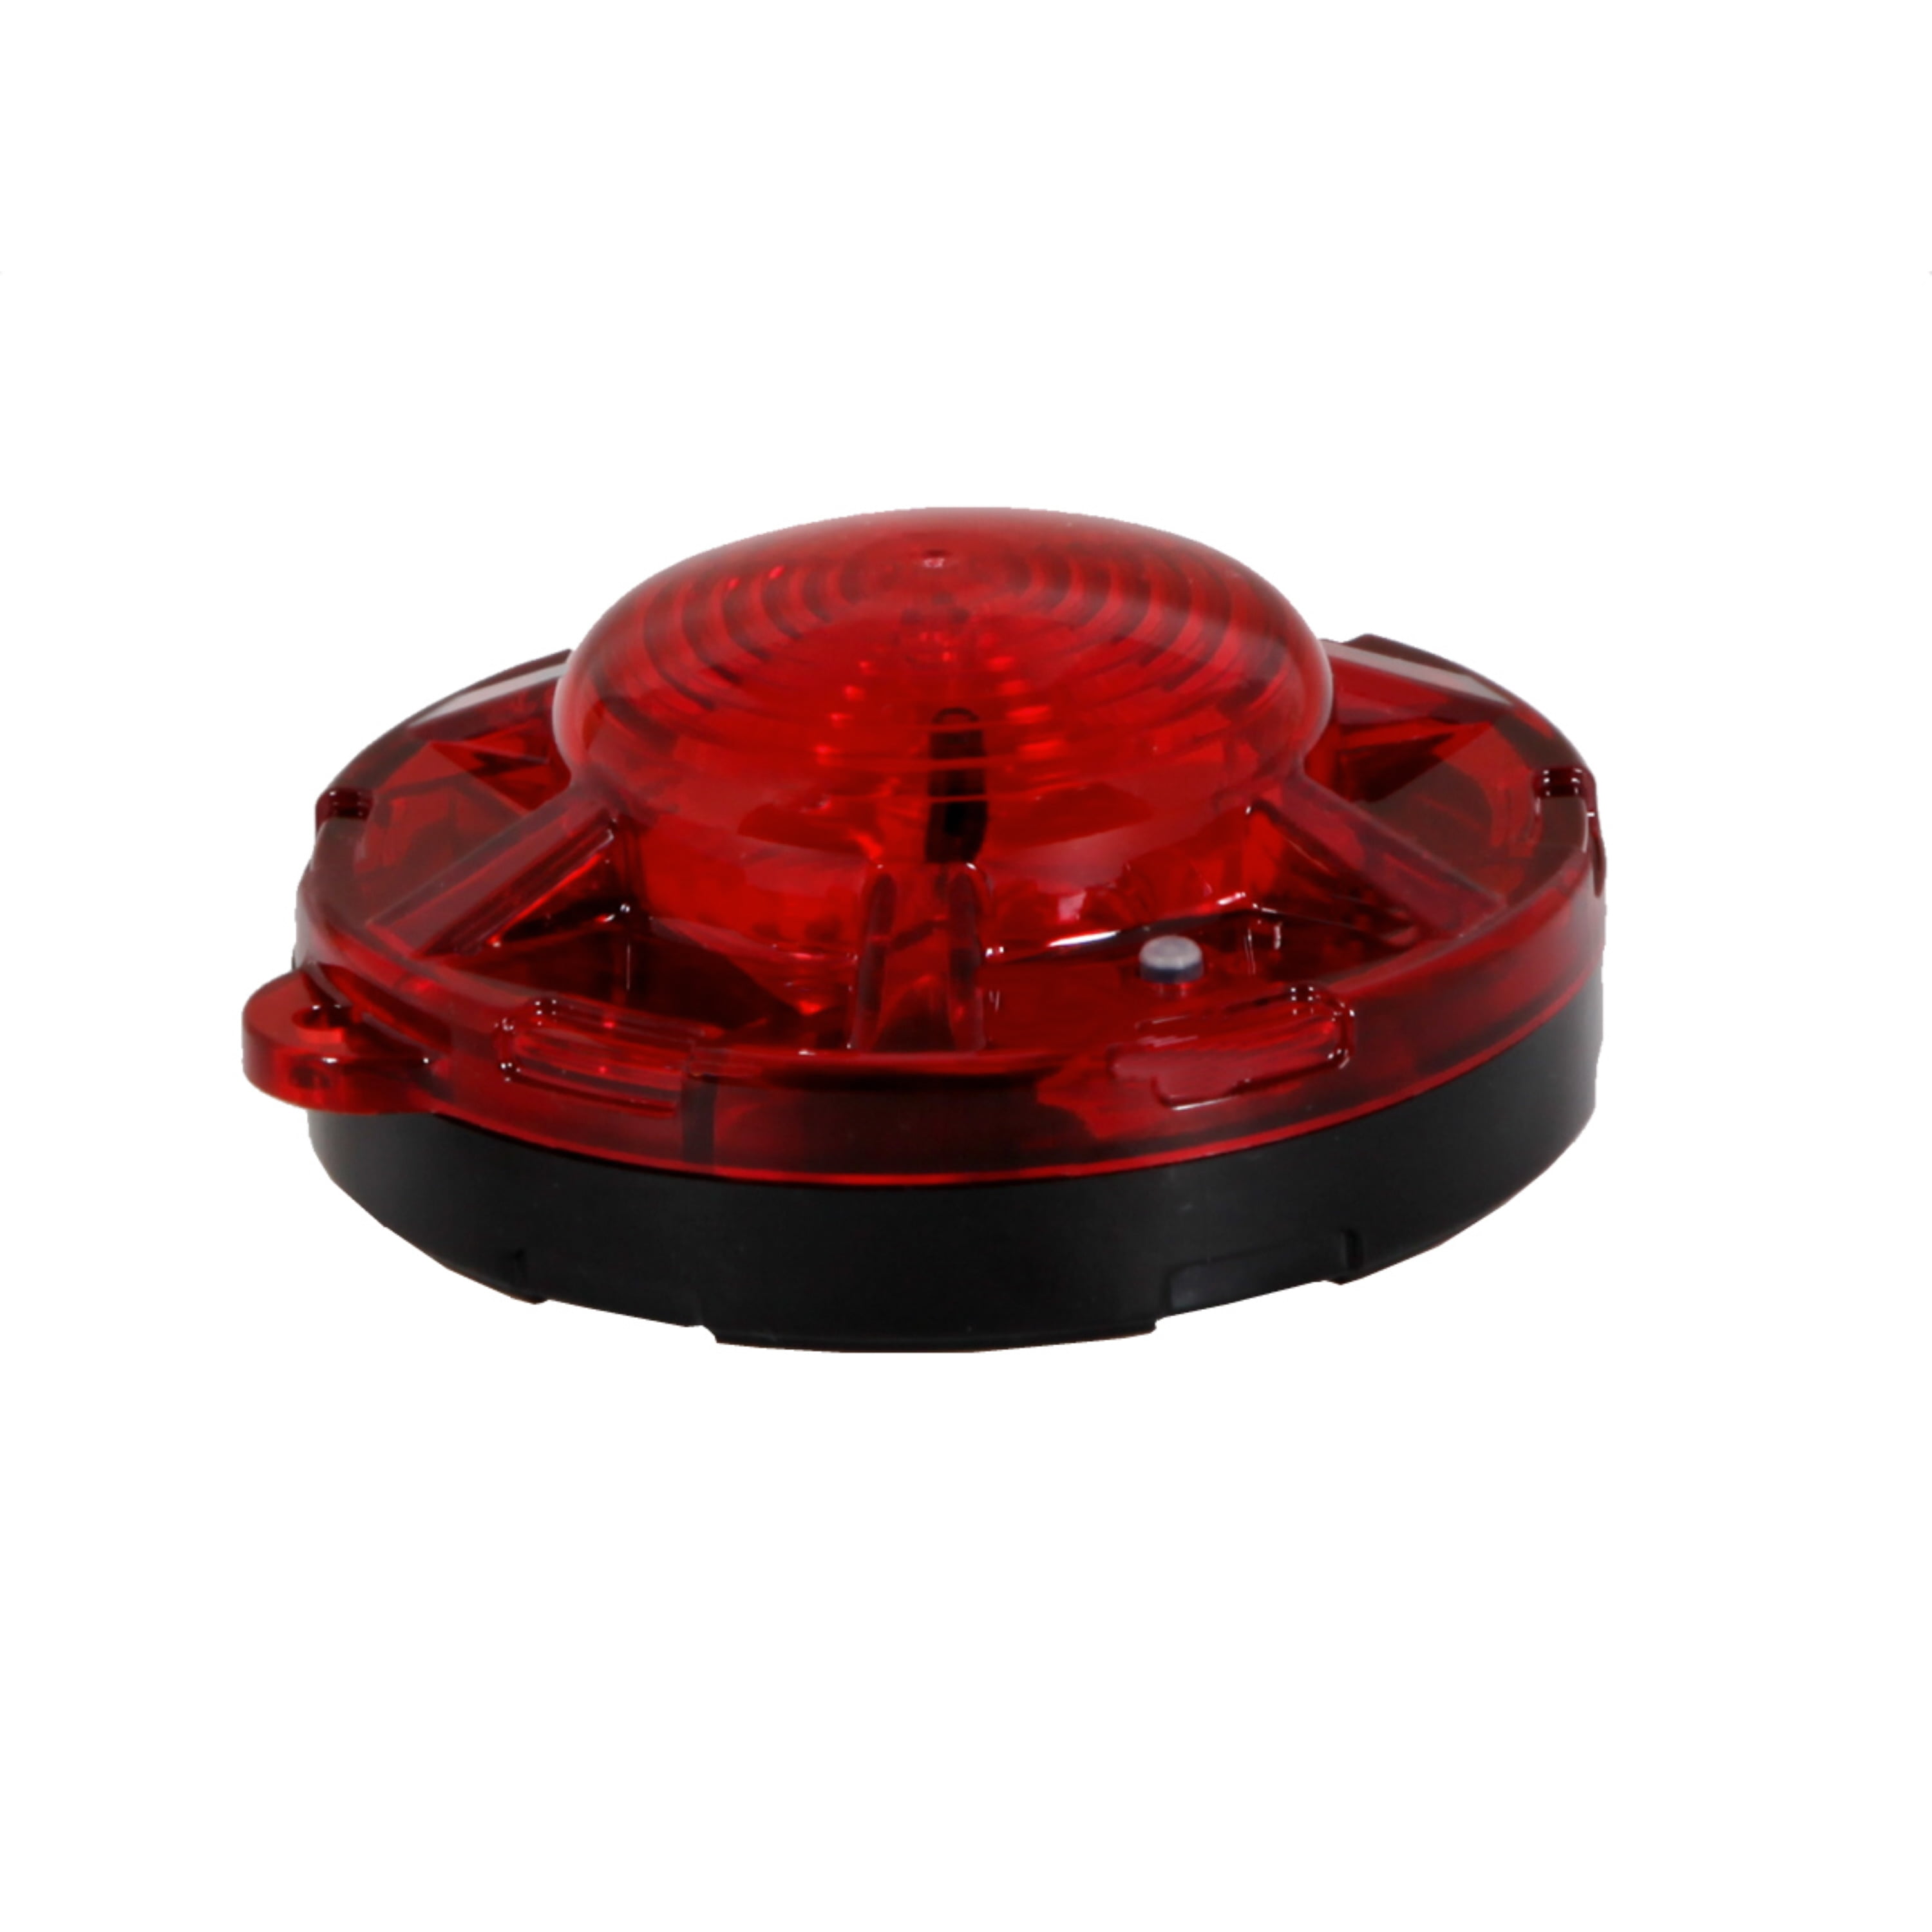 Maxxima Sdl-52-a Red Magnetic 18 LED Emergency Flasher Light for sale online 